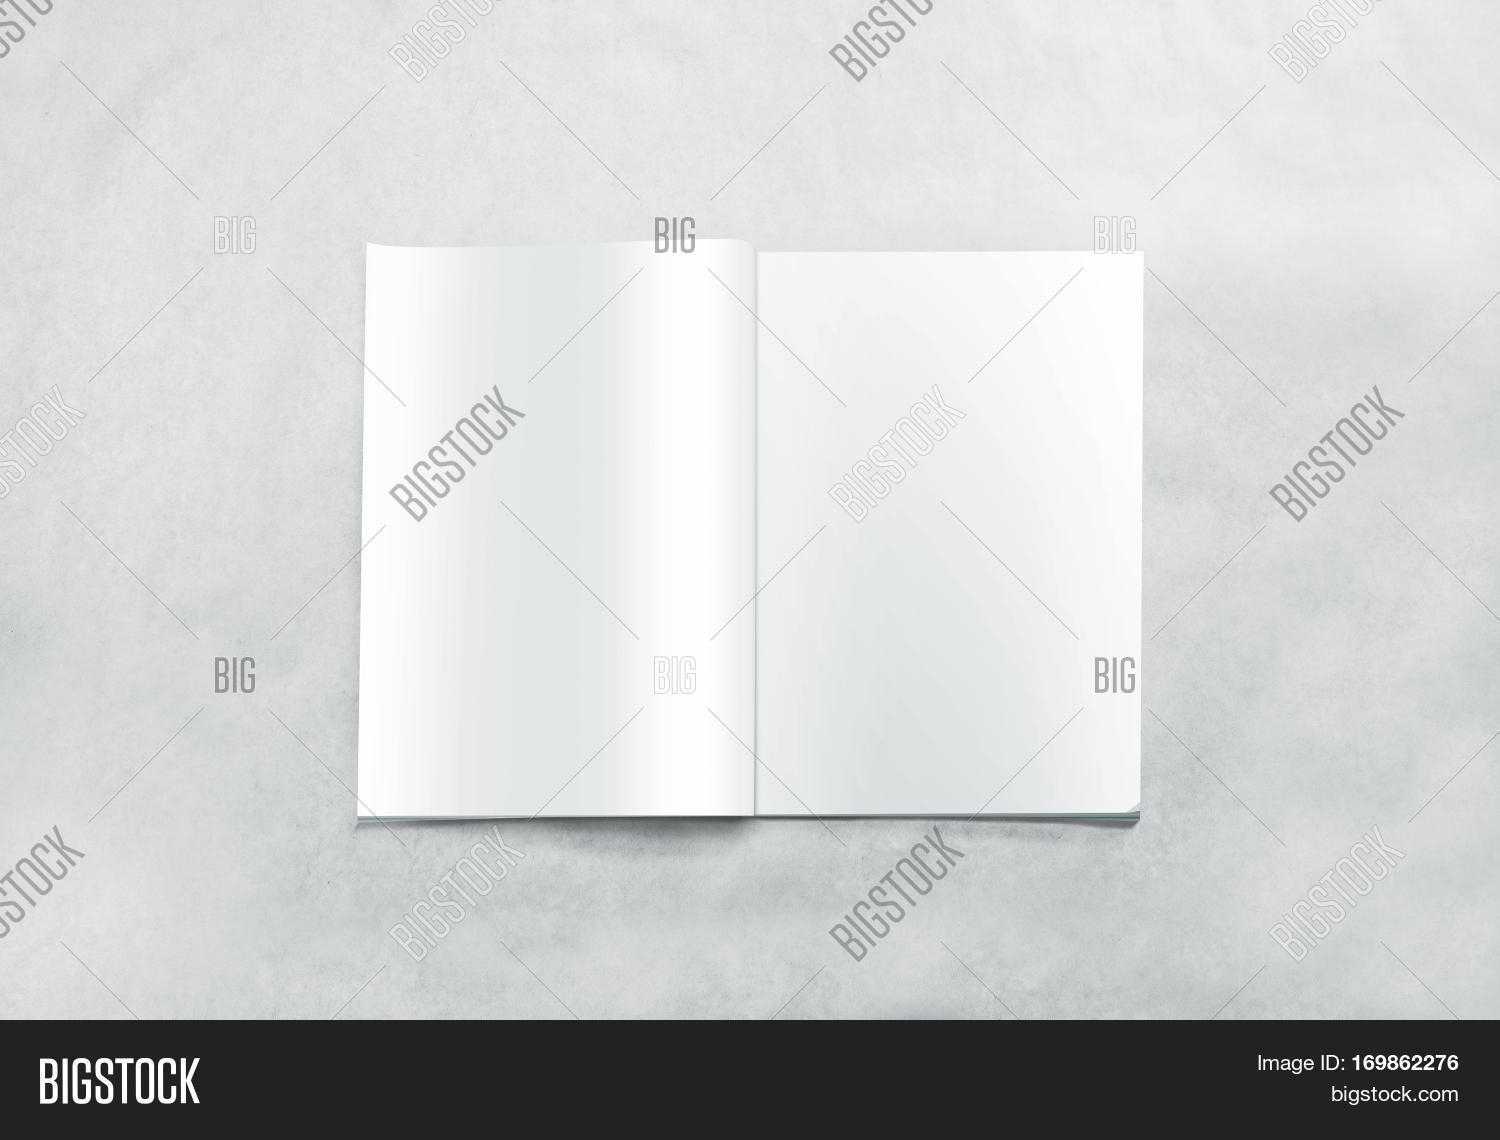 Opened Blank Magazine Image & Photo (Free Trial) | Bigstock With Blank Magazine Spread Template